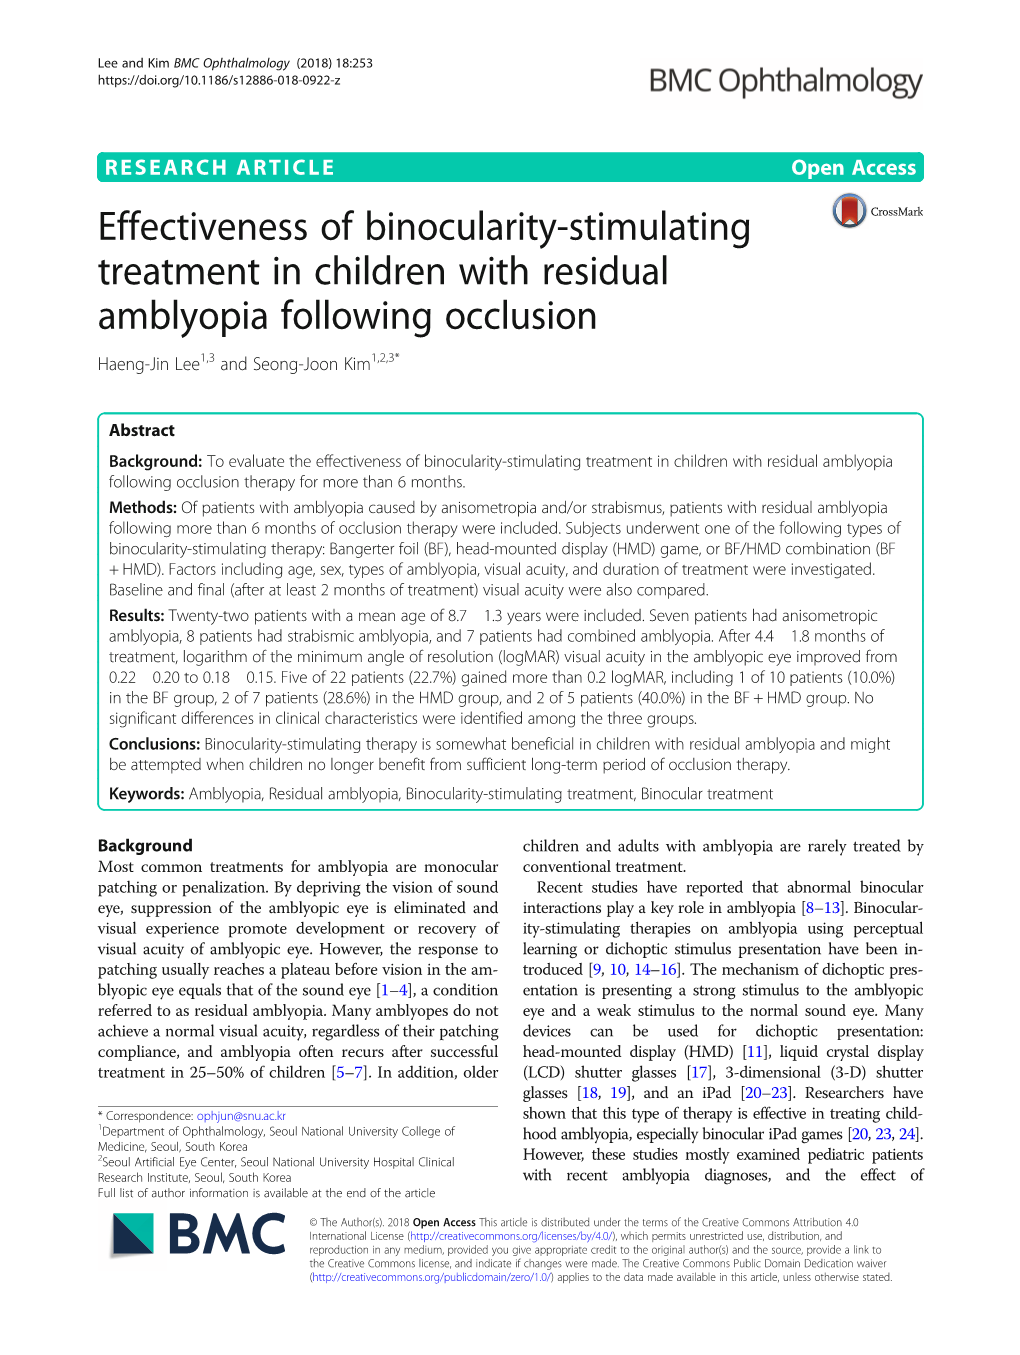 Effectiveness of Binocularity-Stimulating Treatment in Children with Residual Amblyopia Following Occlusion Haeng-Jin Lee1,3 and Seong-Joon Kim1,2,3*